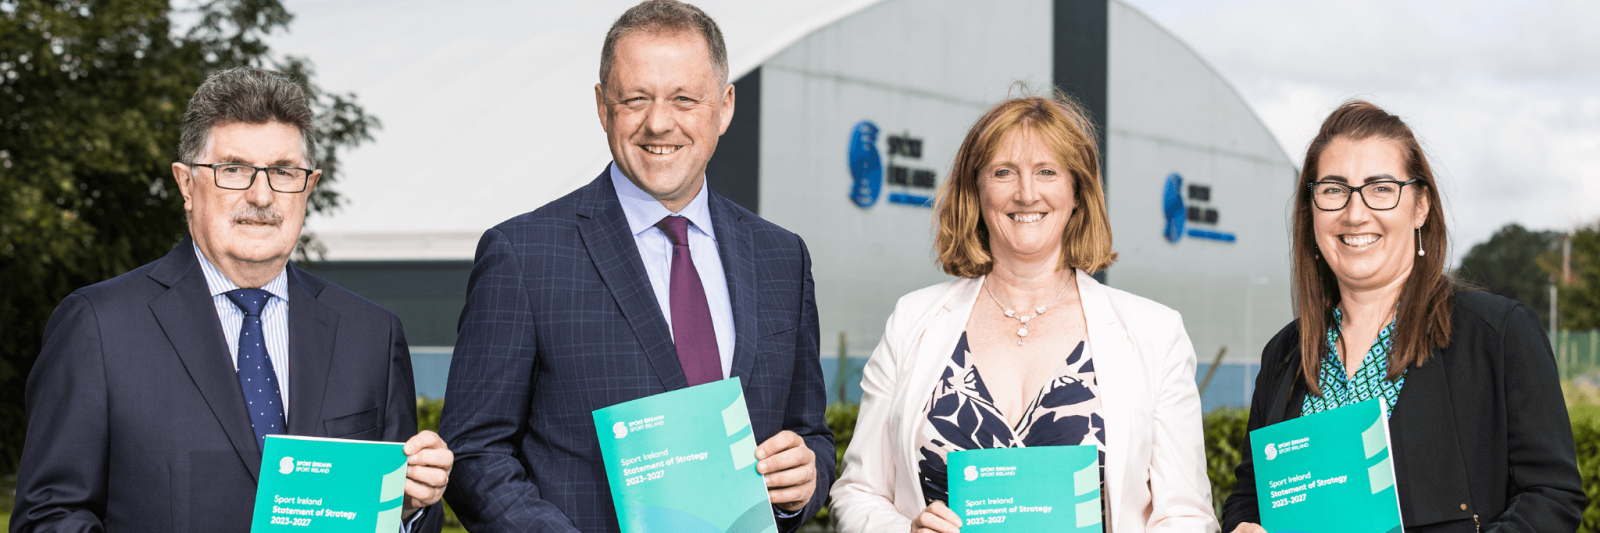 Minister Byrne launches Sport Ireland Five Year Strategy